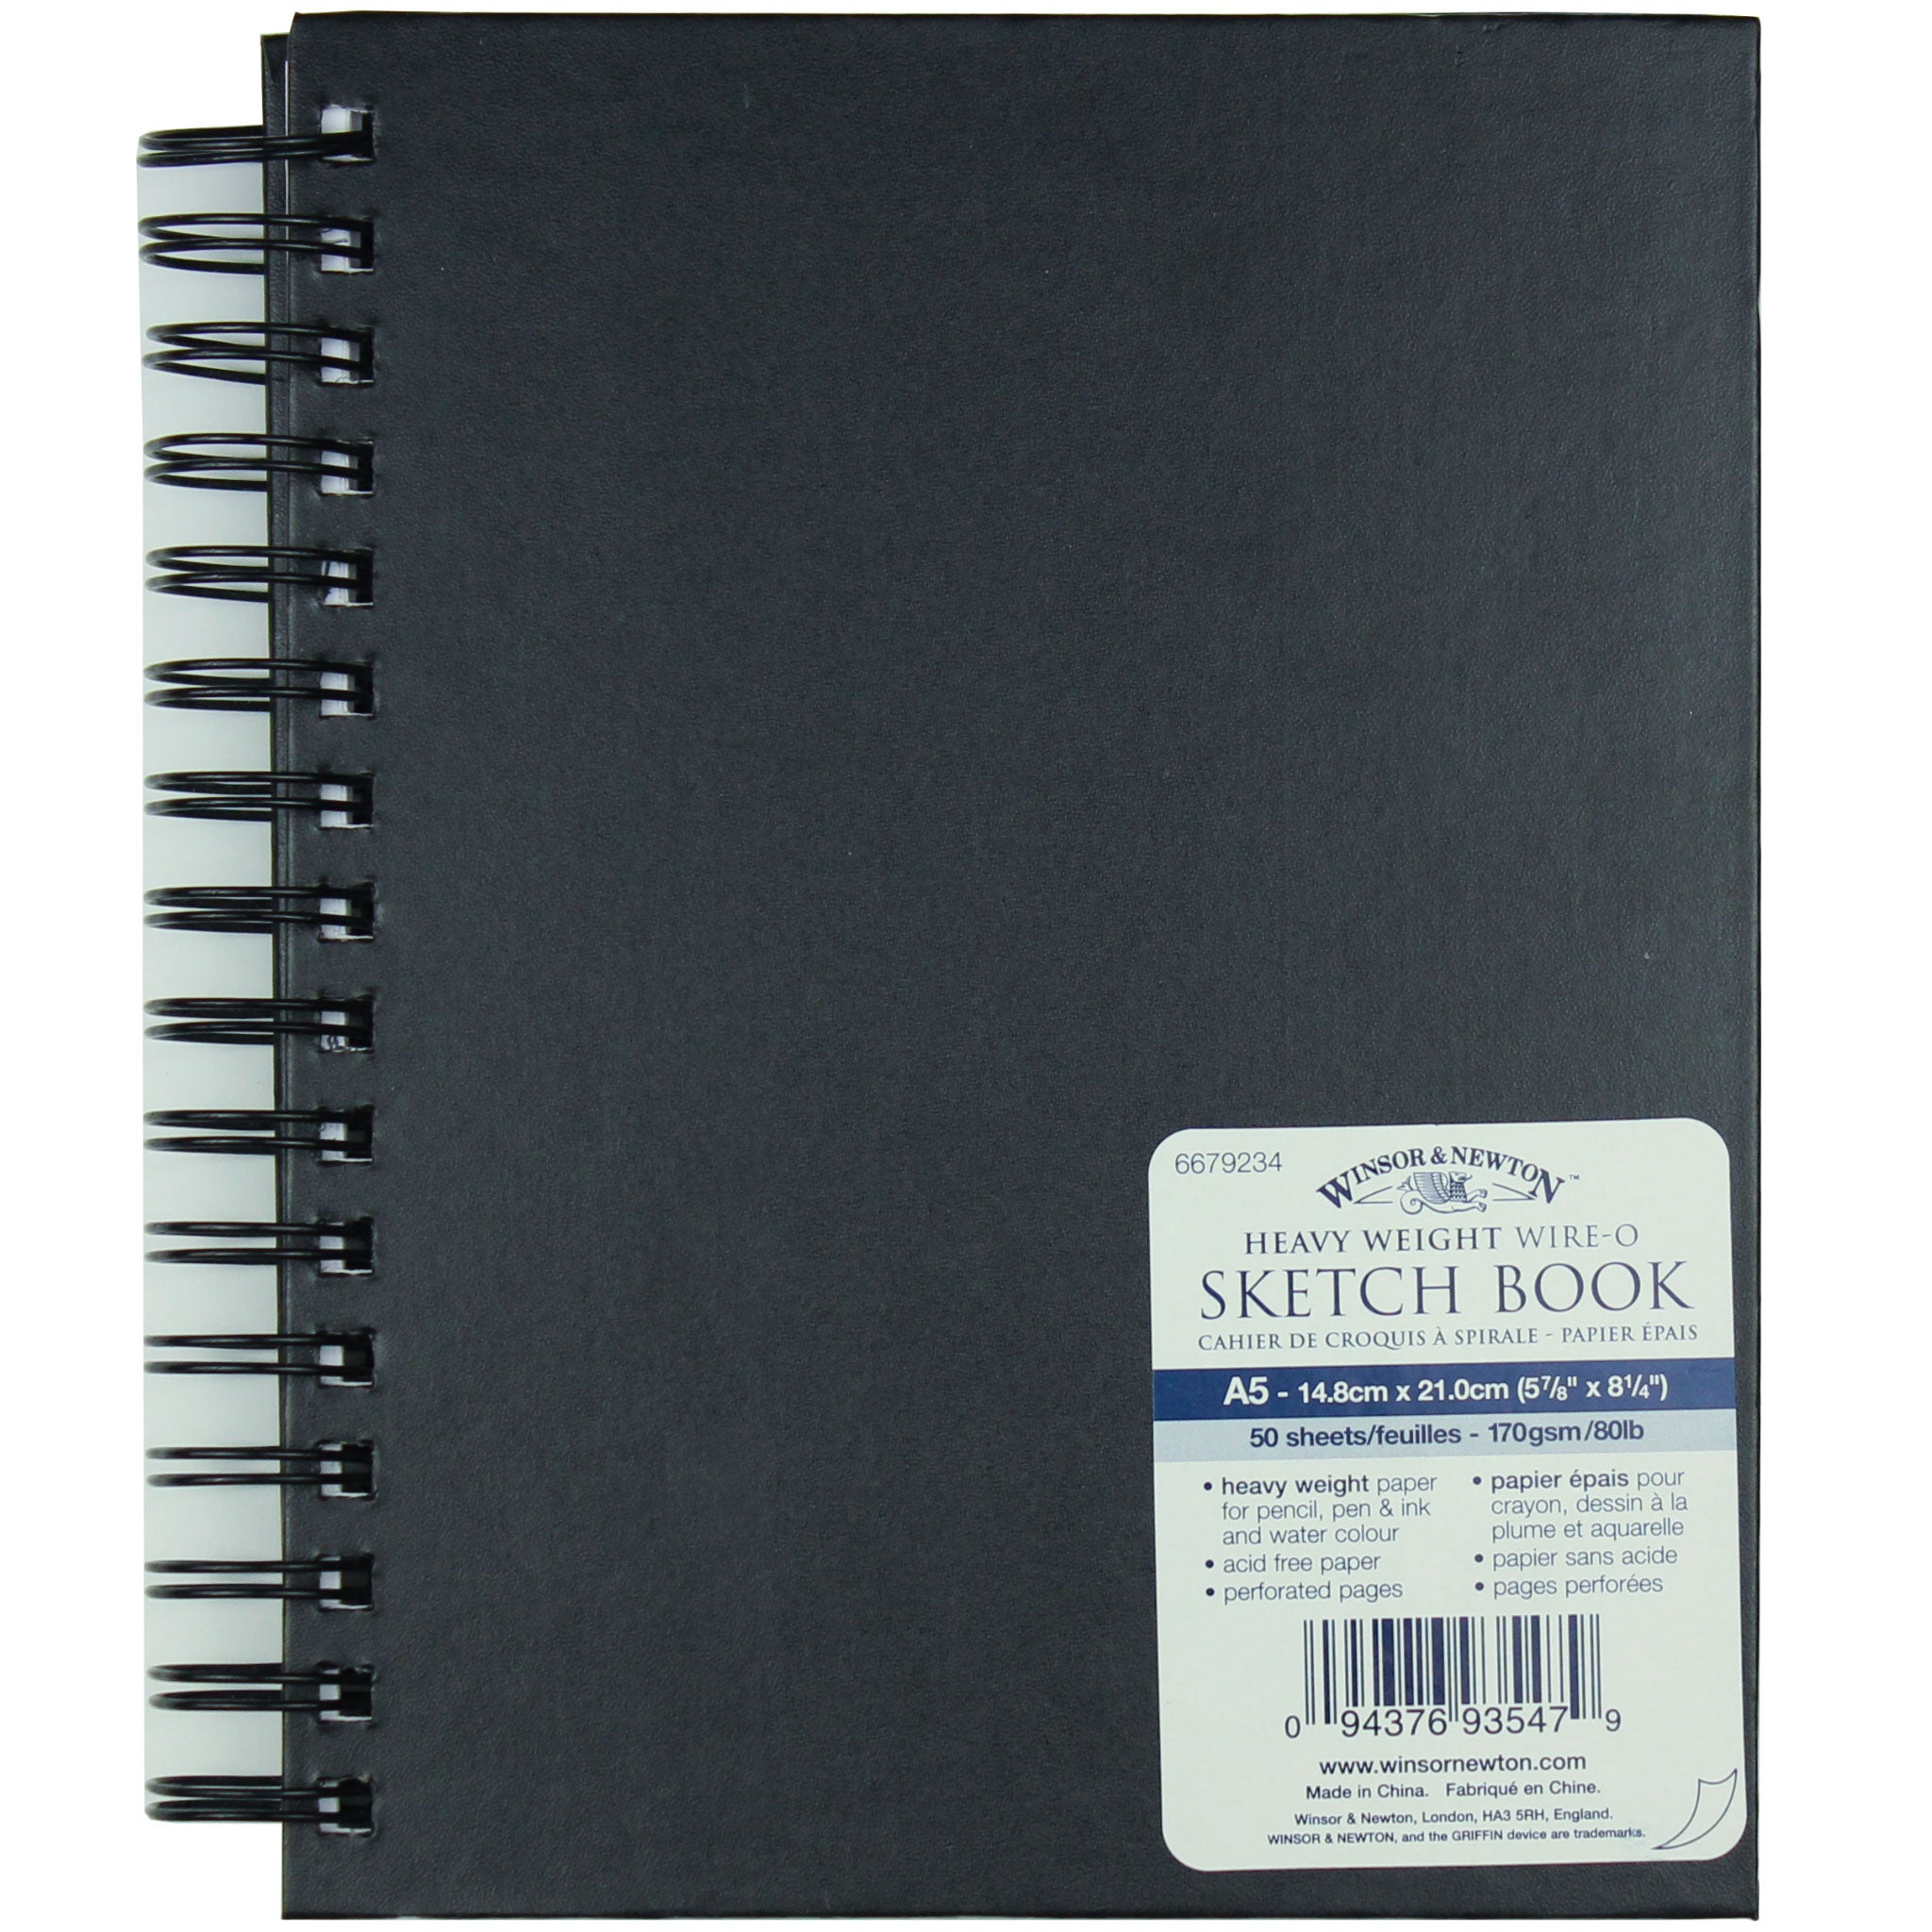 Winsor & Newton Sketchbook 50 lb Wire Bound 9x12 Pad 80-Sheets